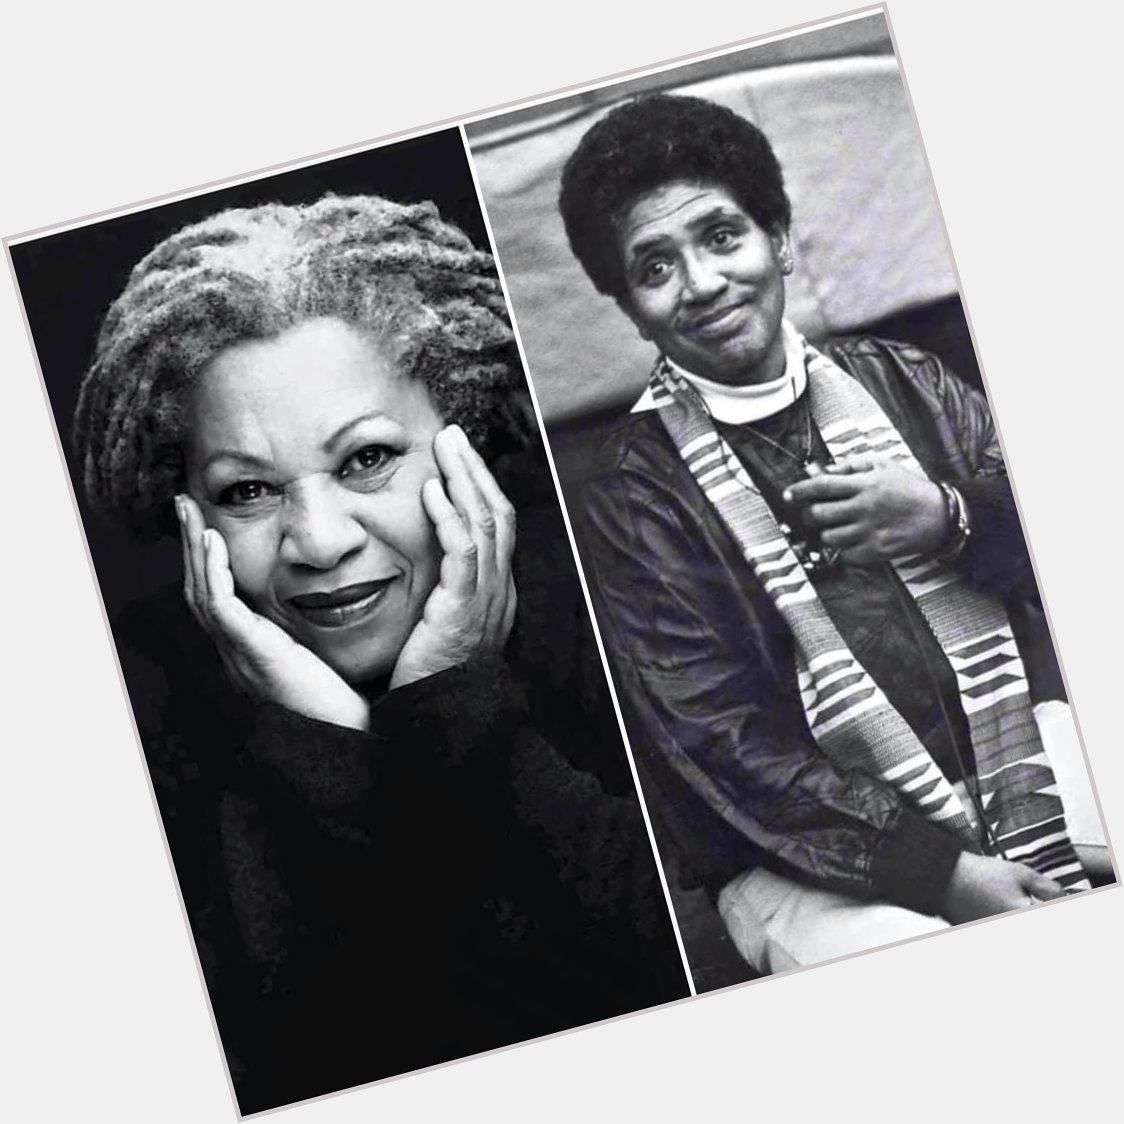 February 18th is a sacred day. Happy Birthday to Toni Morrison (1931-2019) and Audre Lorde (1934-1992). 